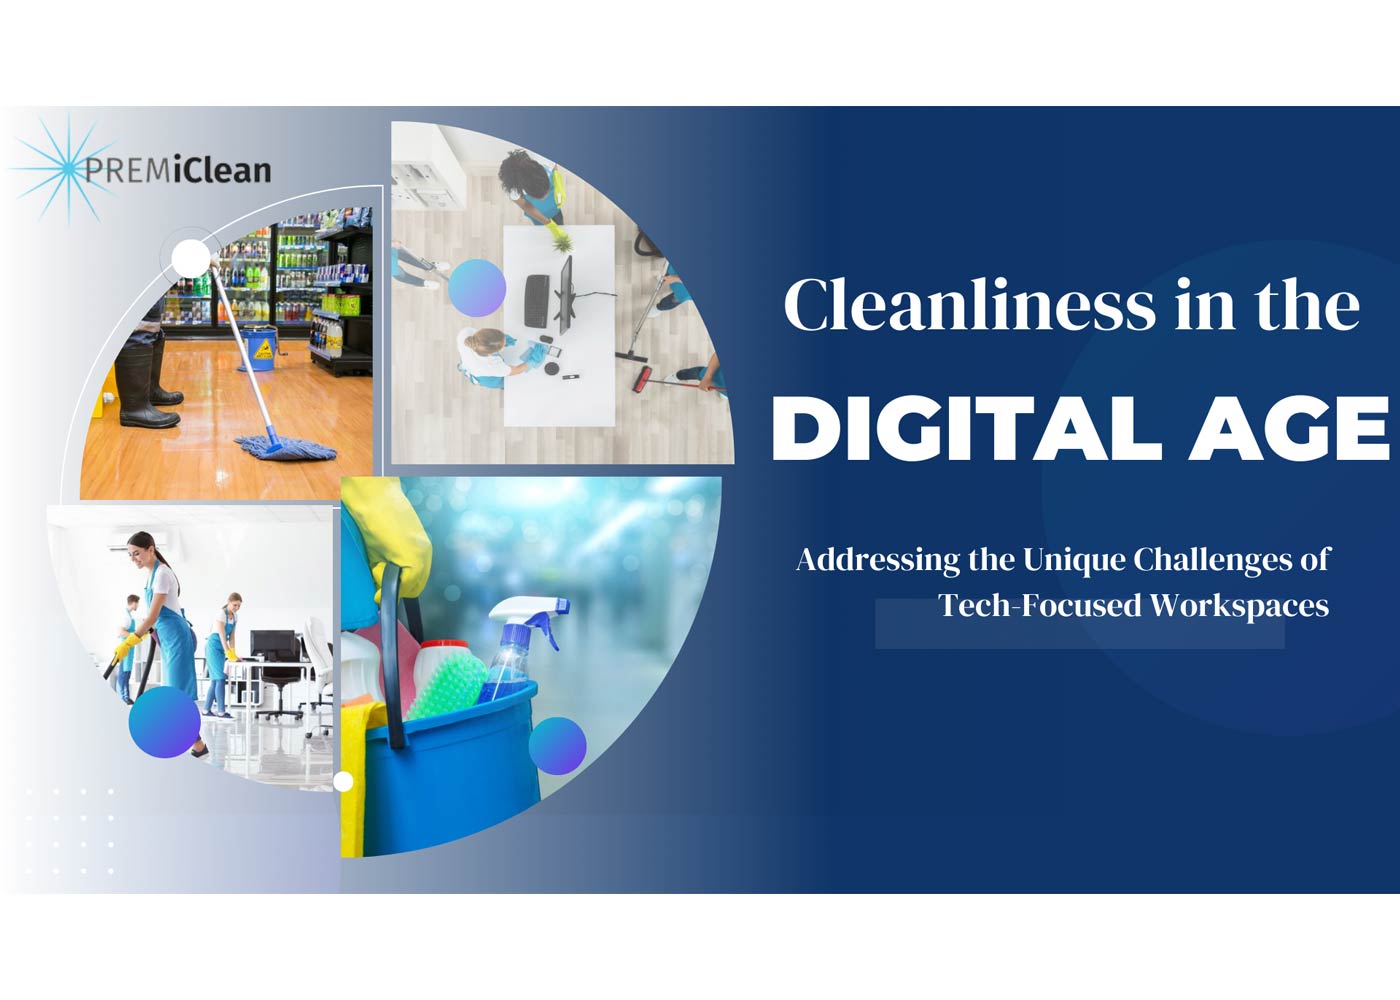 Cleanliness in the Digital Age: Addressing the Unique Challenges of Tech-Focused Workspaces